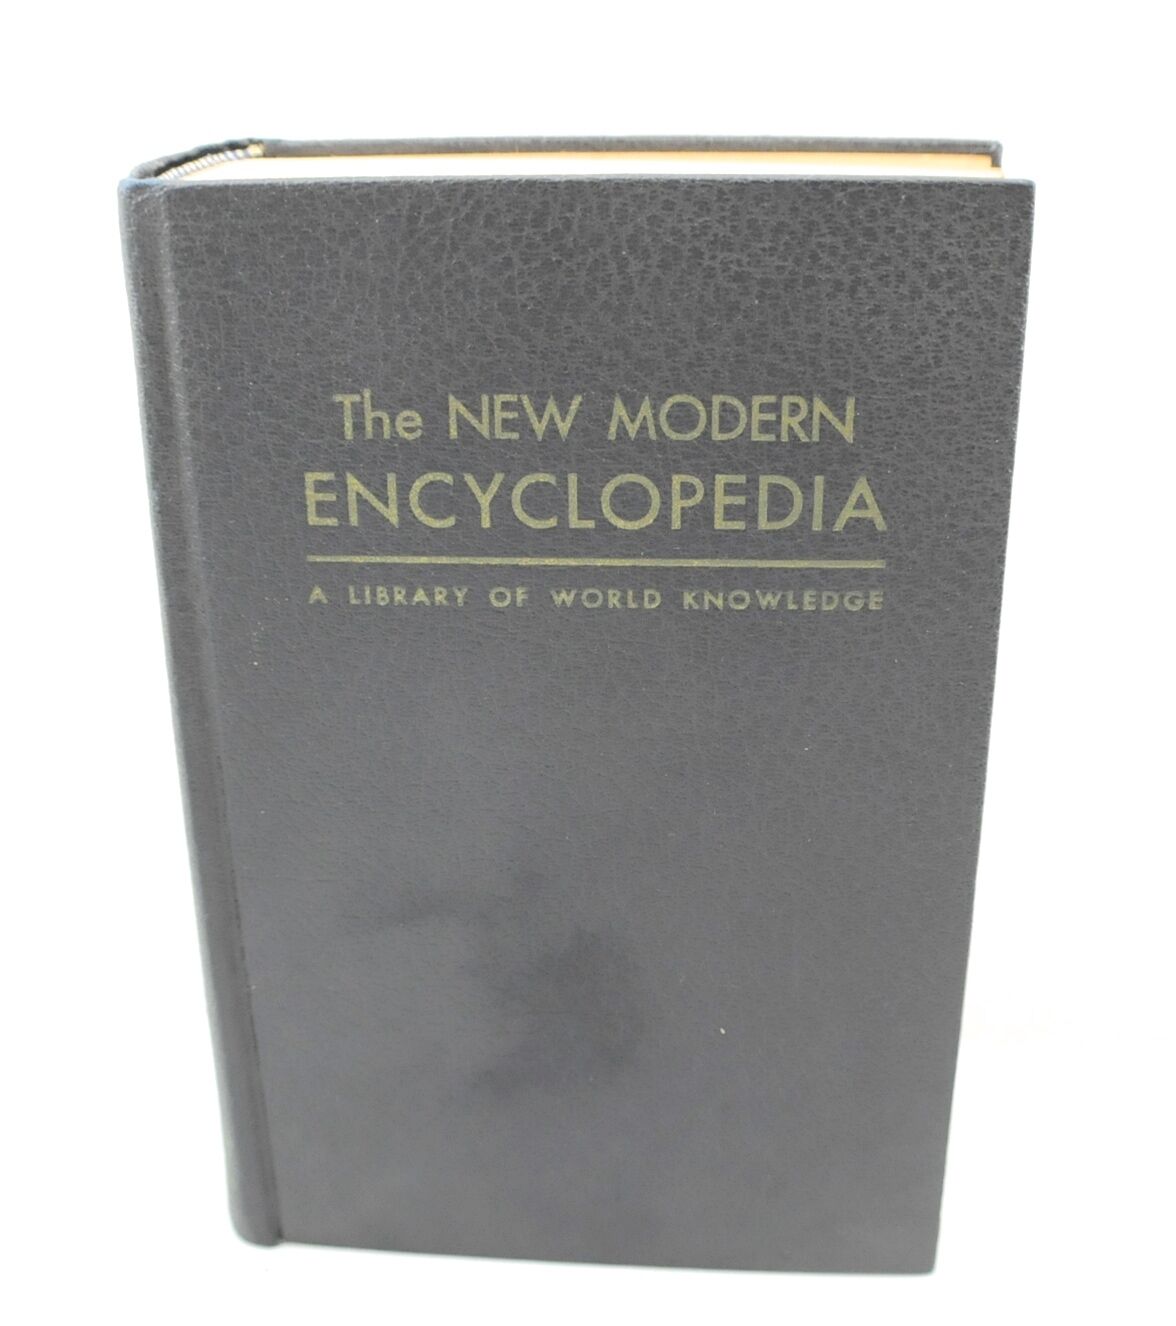 The Modern Encyclopedia A Library of World Knowledge (1944)